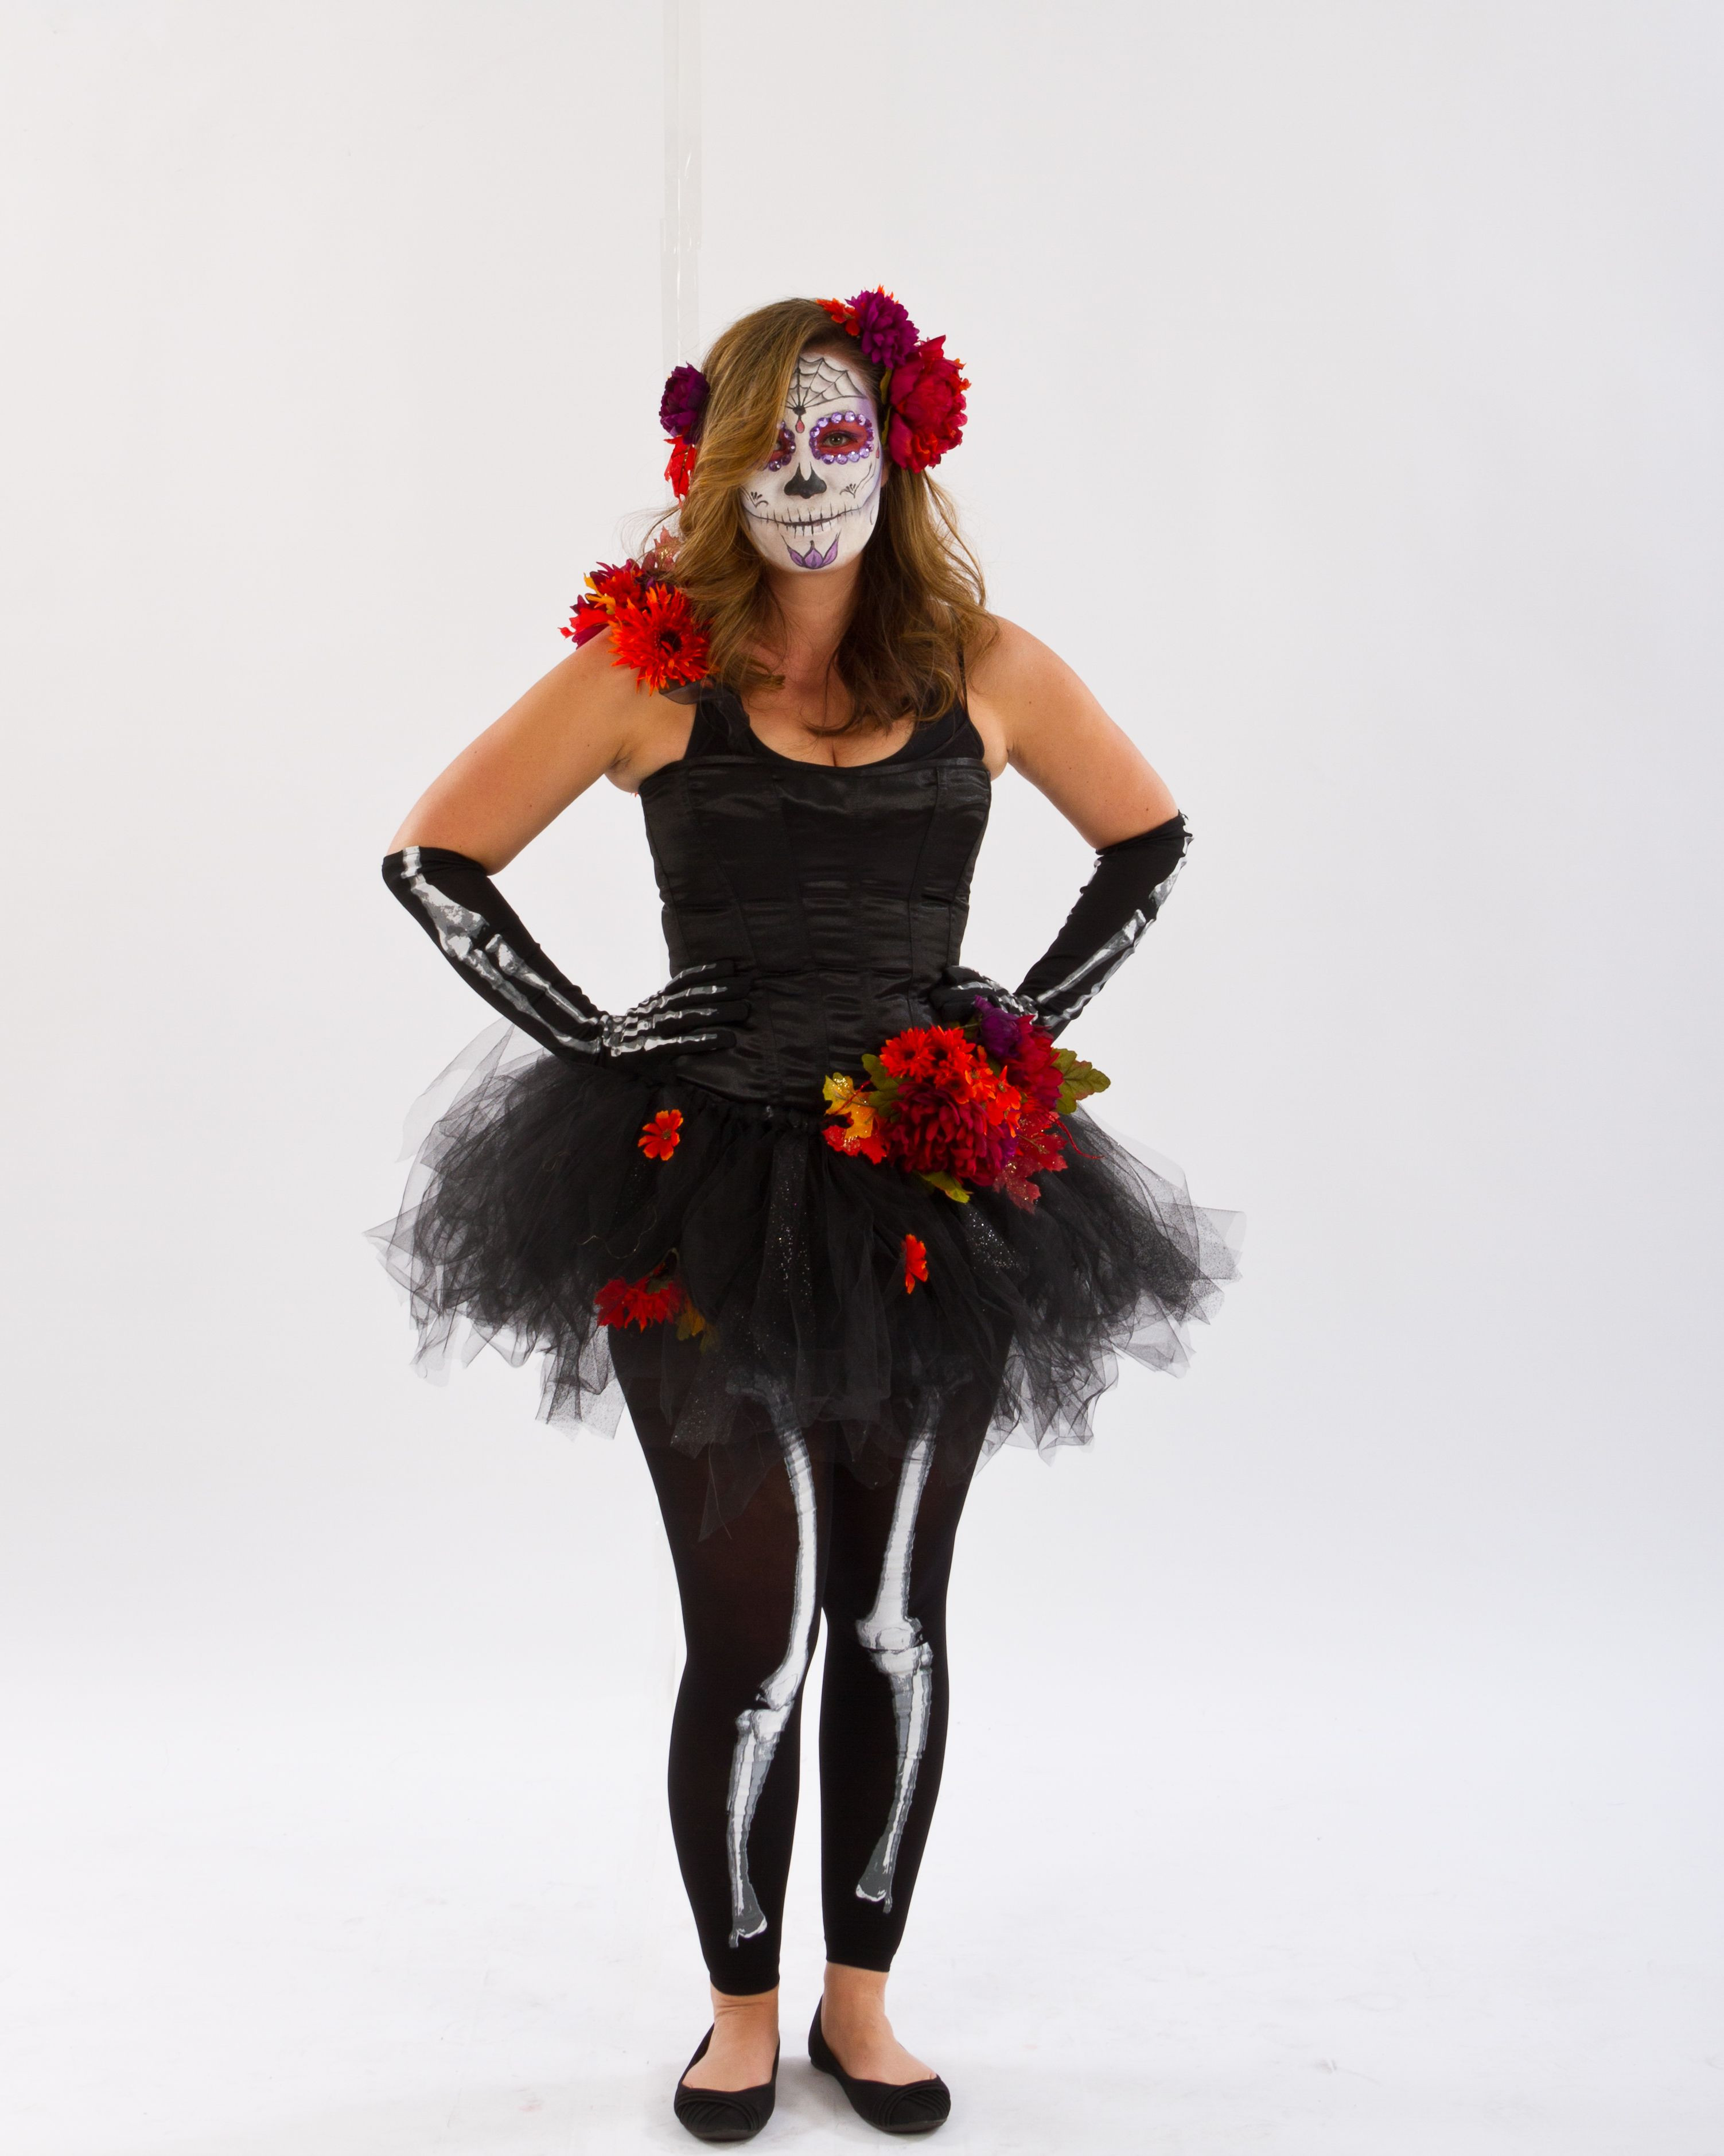 DIY Day Of The Dead Costume
 To for DIY Day of the Dead costume starting with